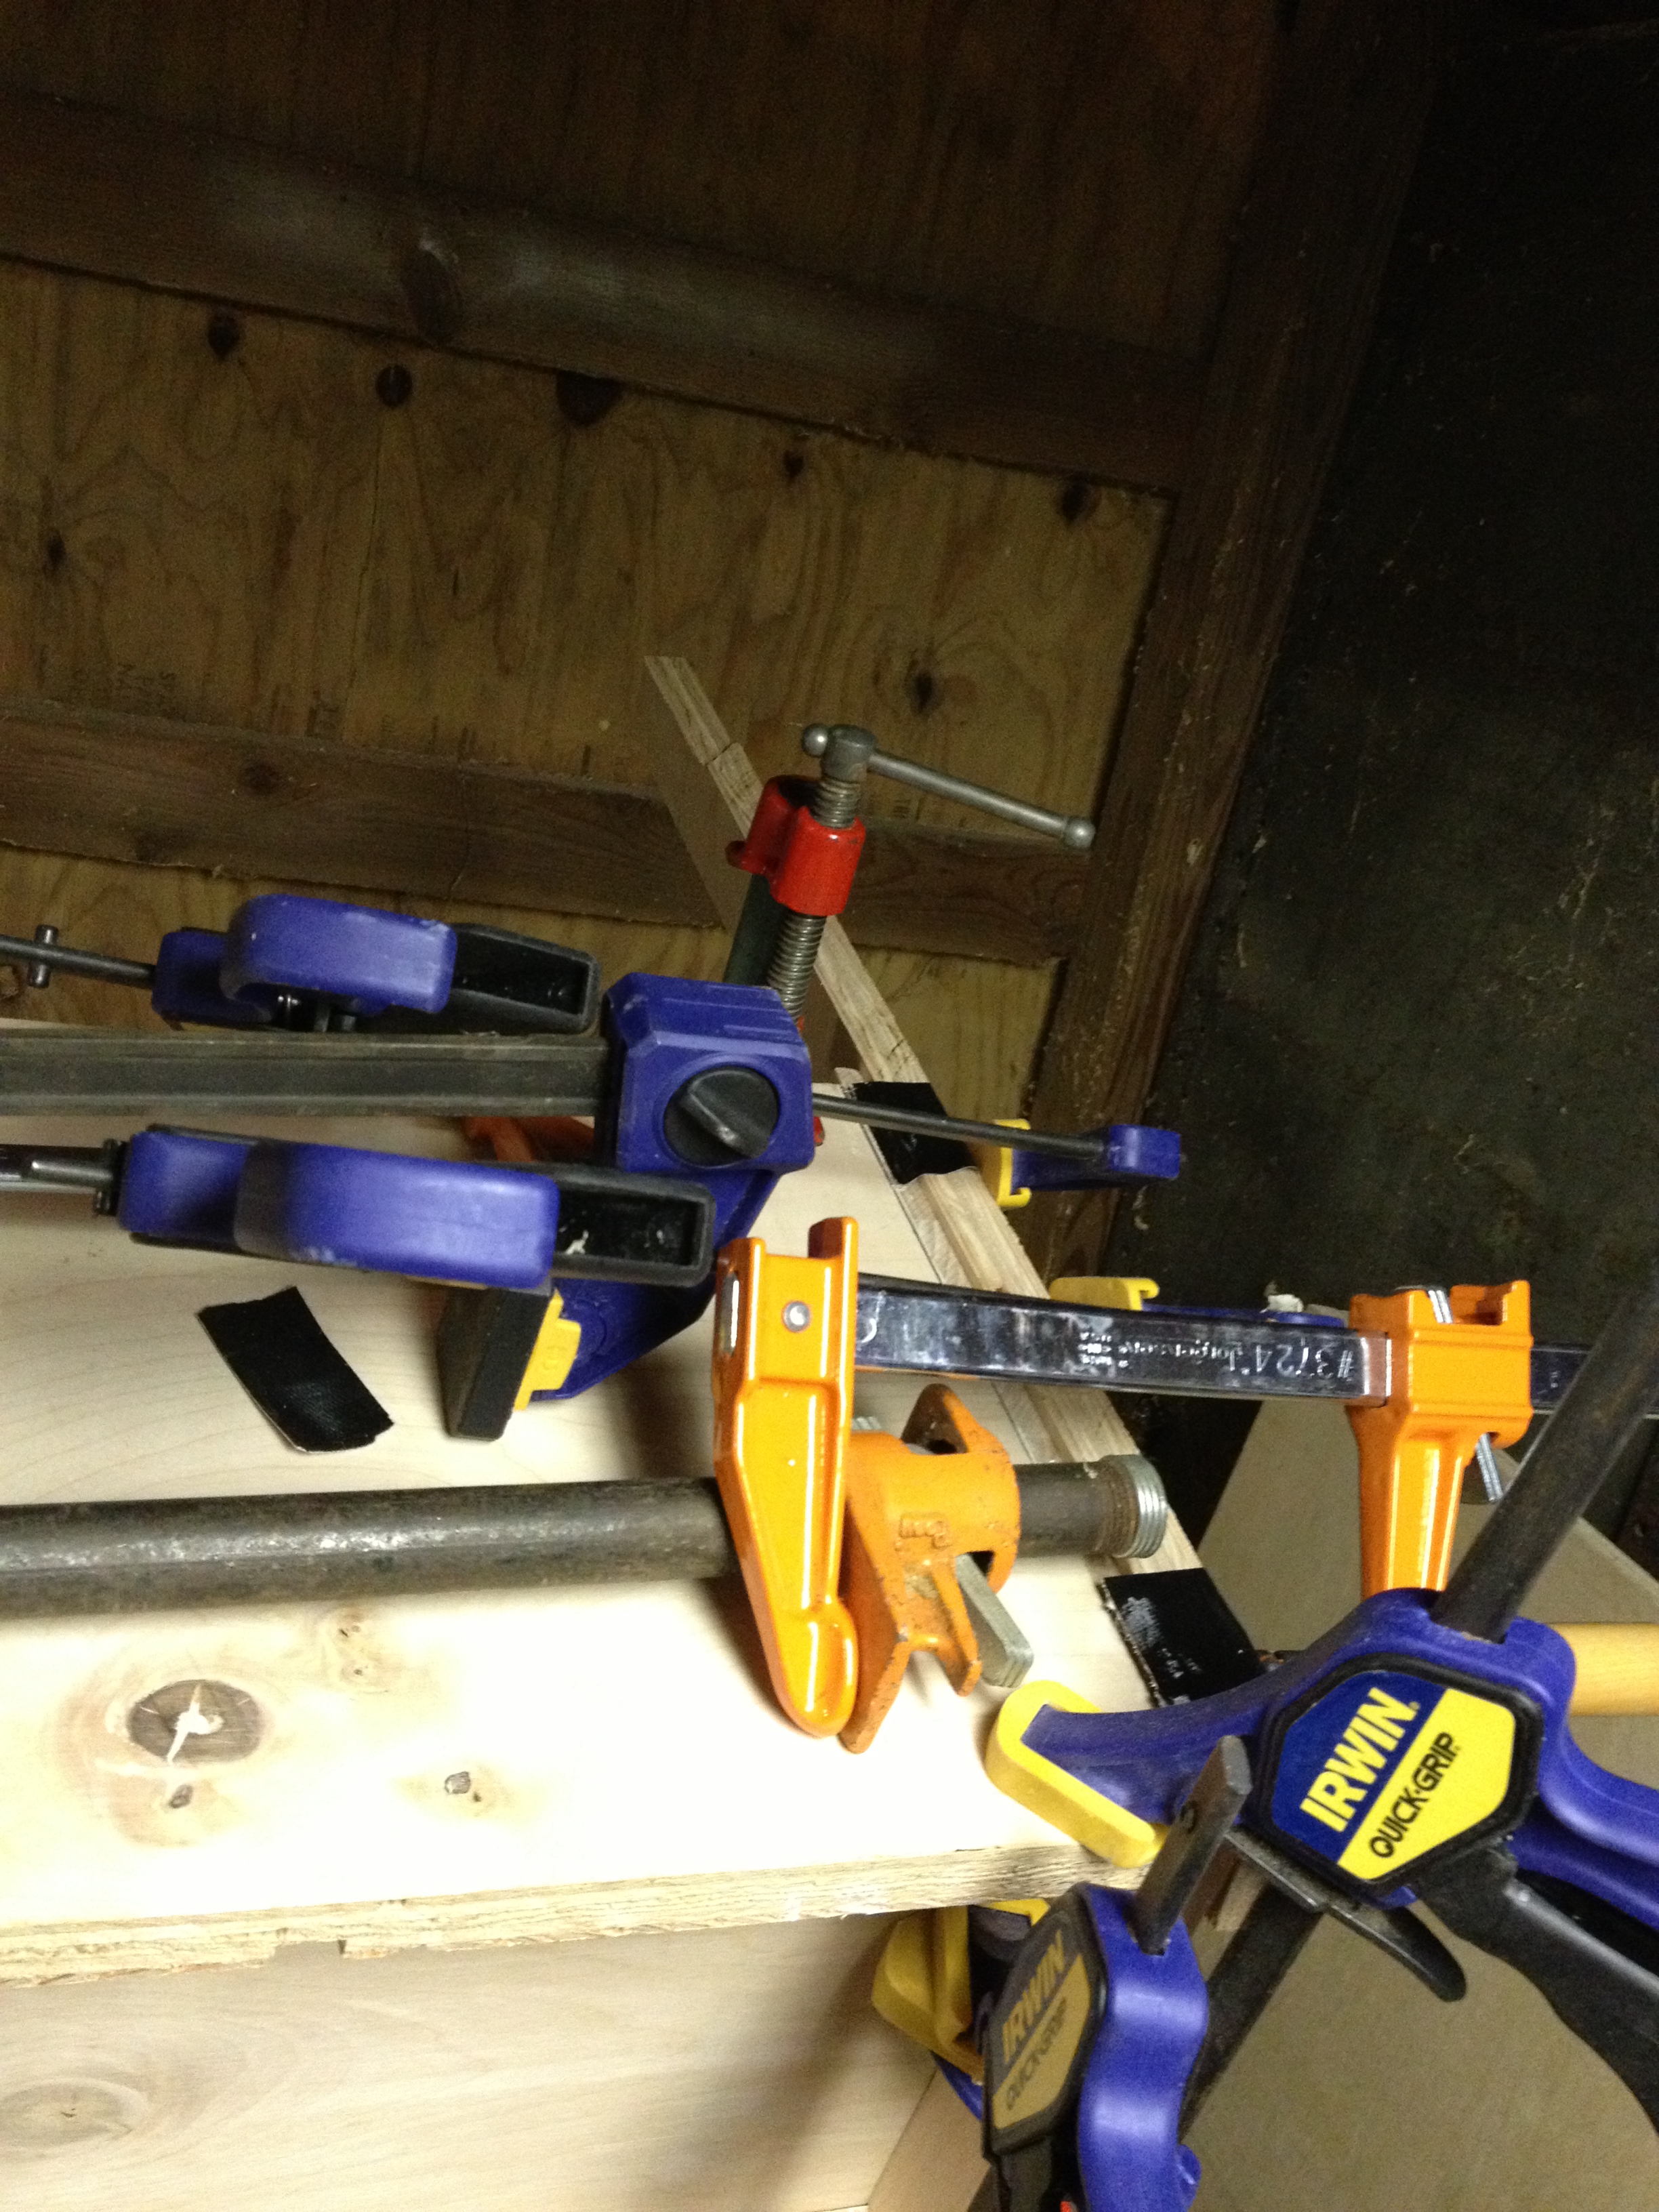 You can never have to many clamps